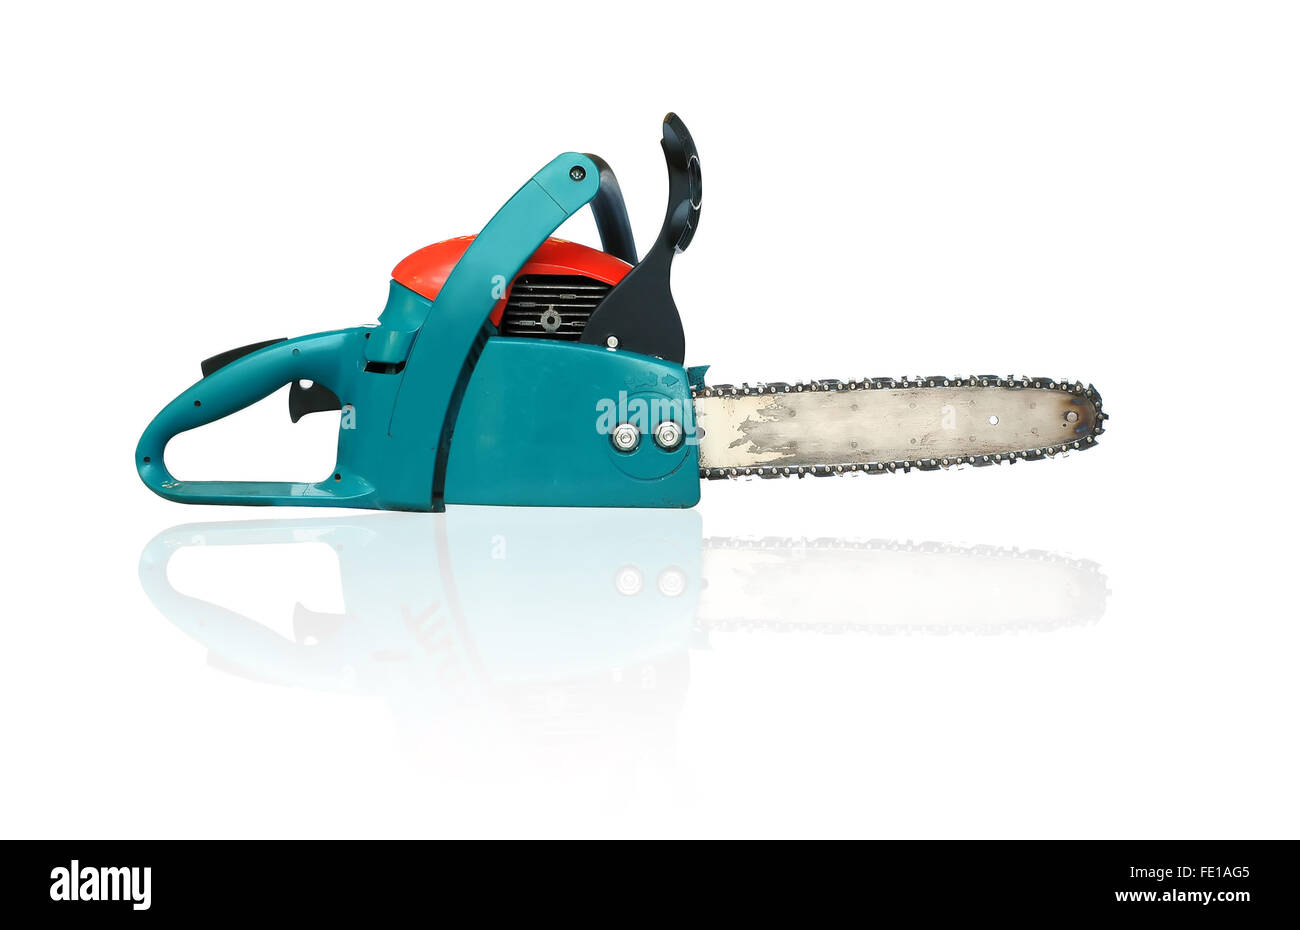 chainsaw isolated Stock Photo